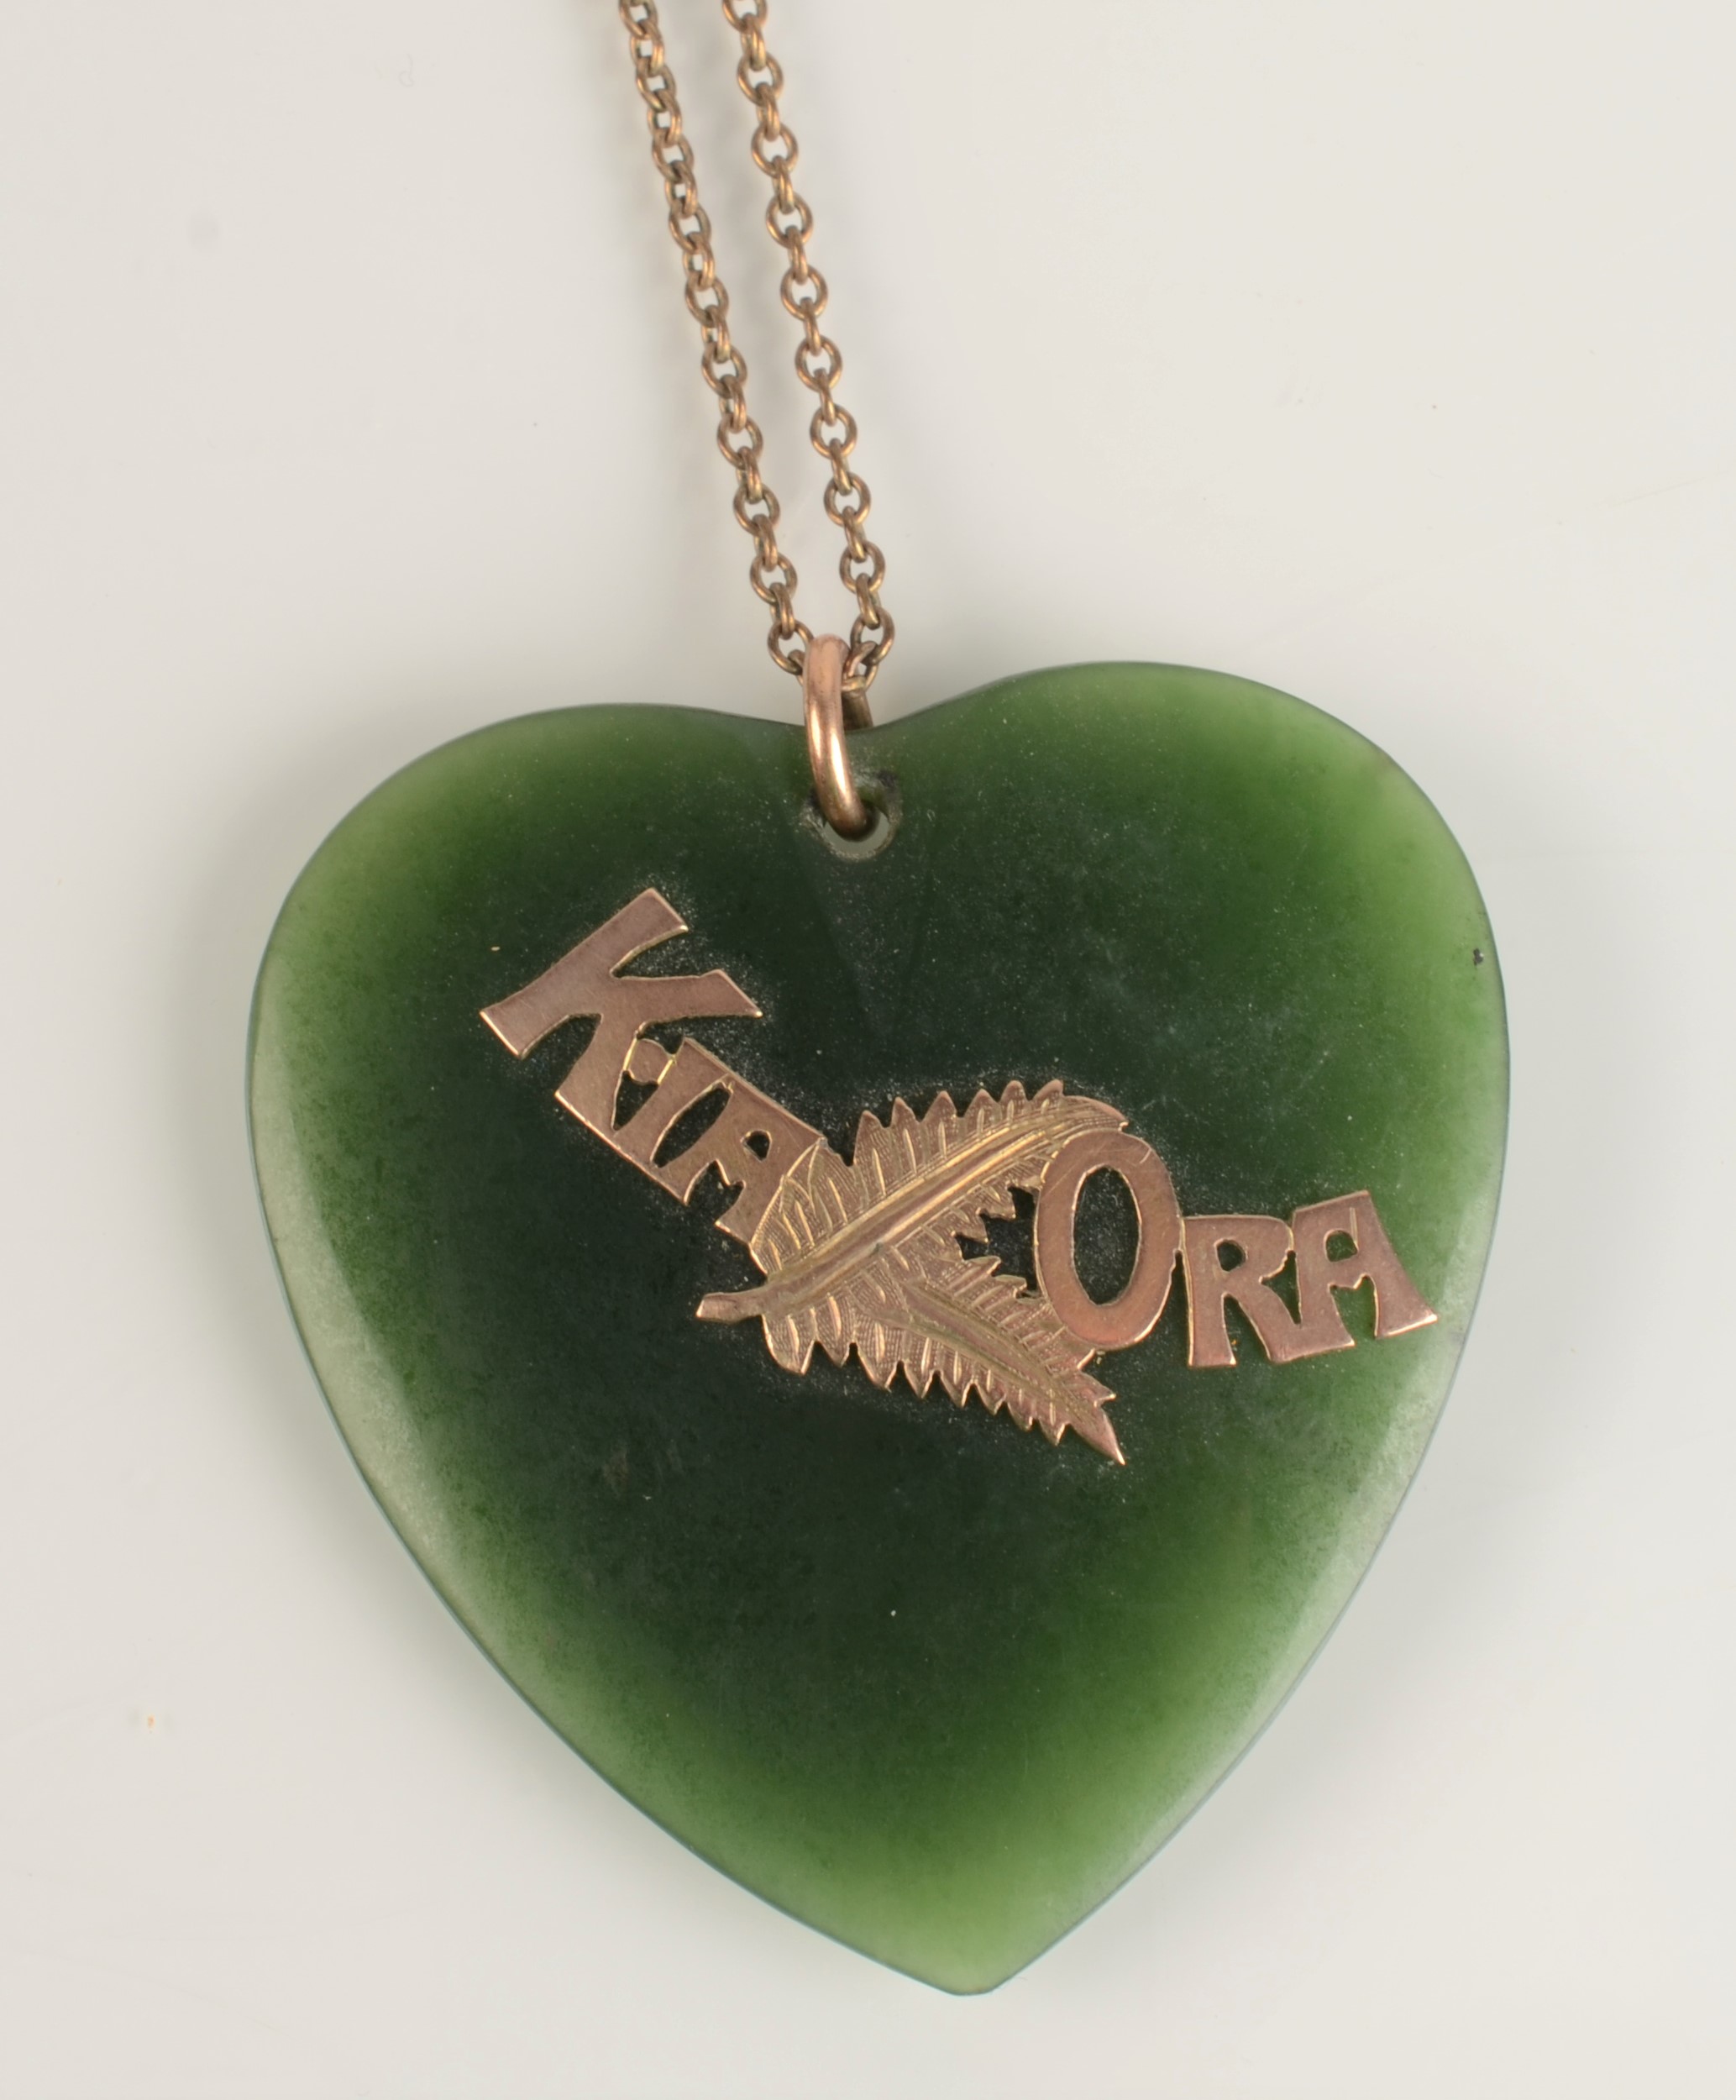 A New Zealand green stone large heart pendant with gold Kia Ora mount and on gold chain.